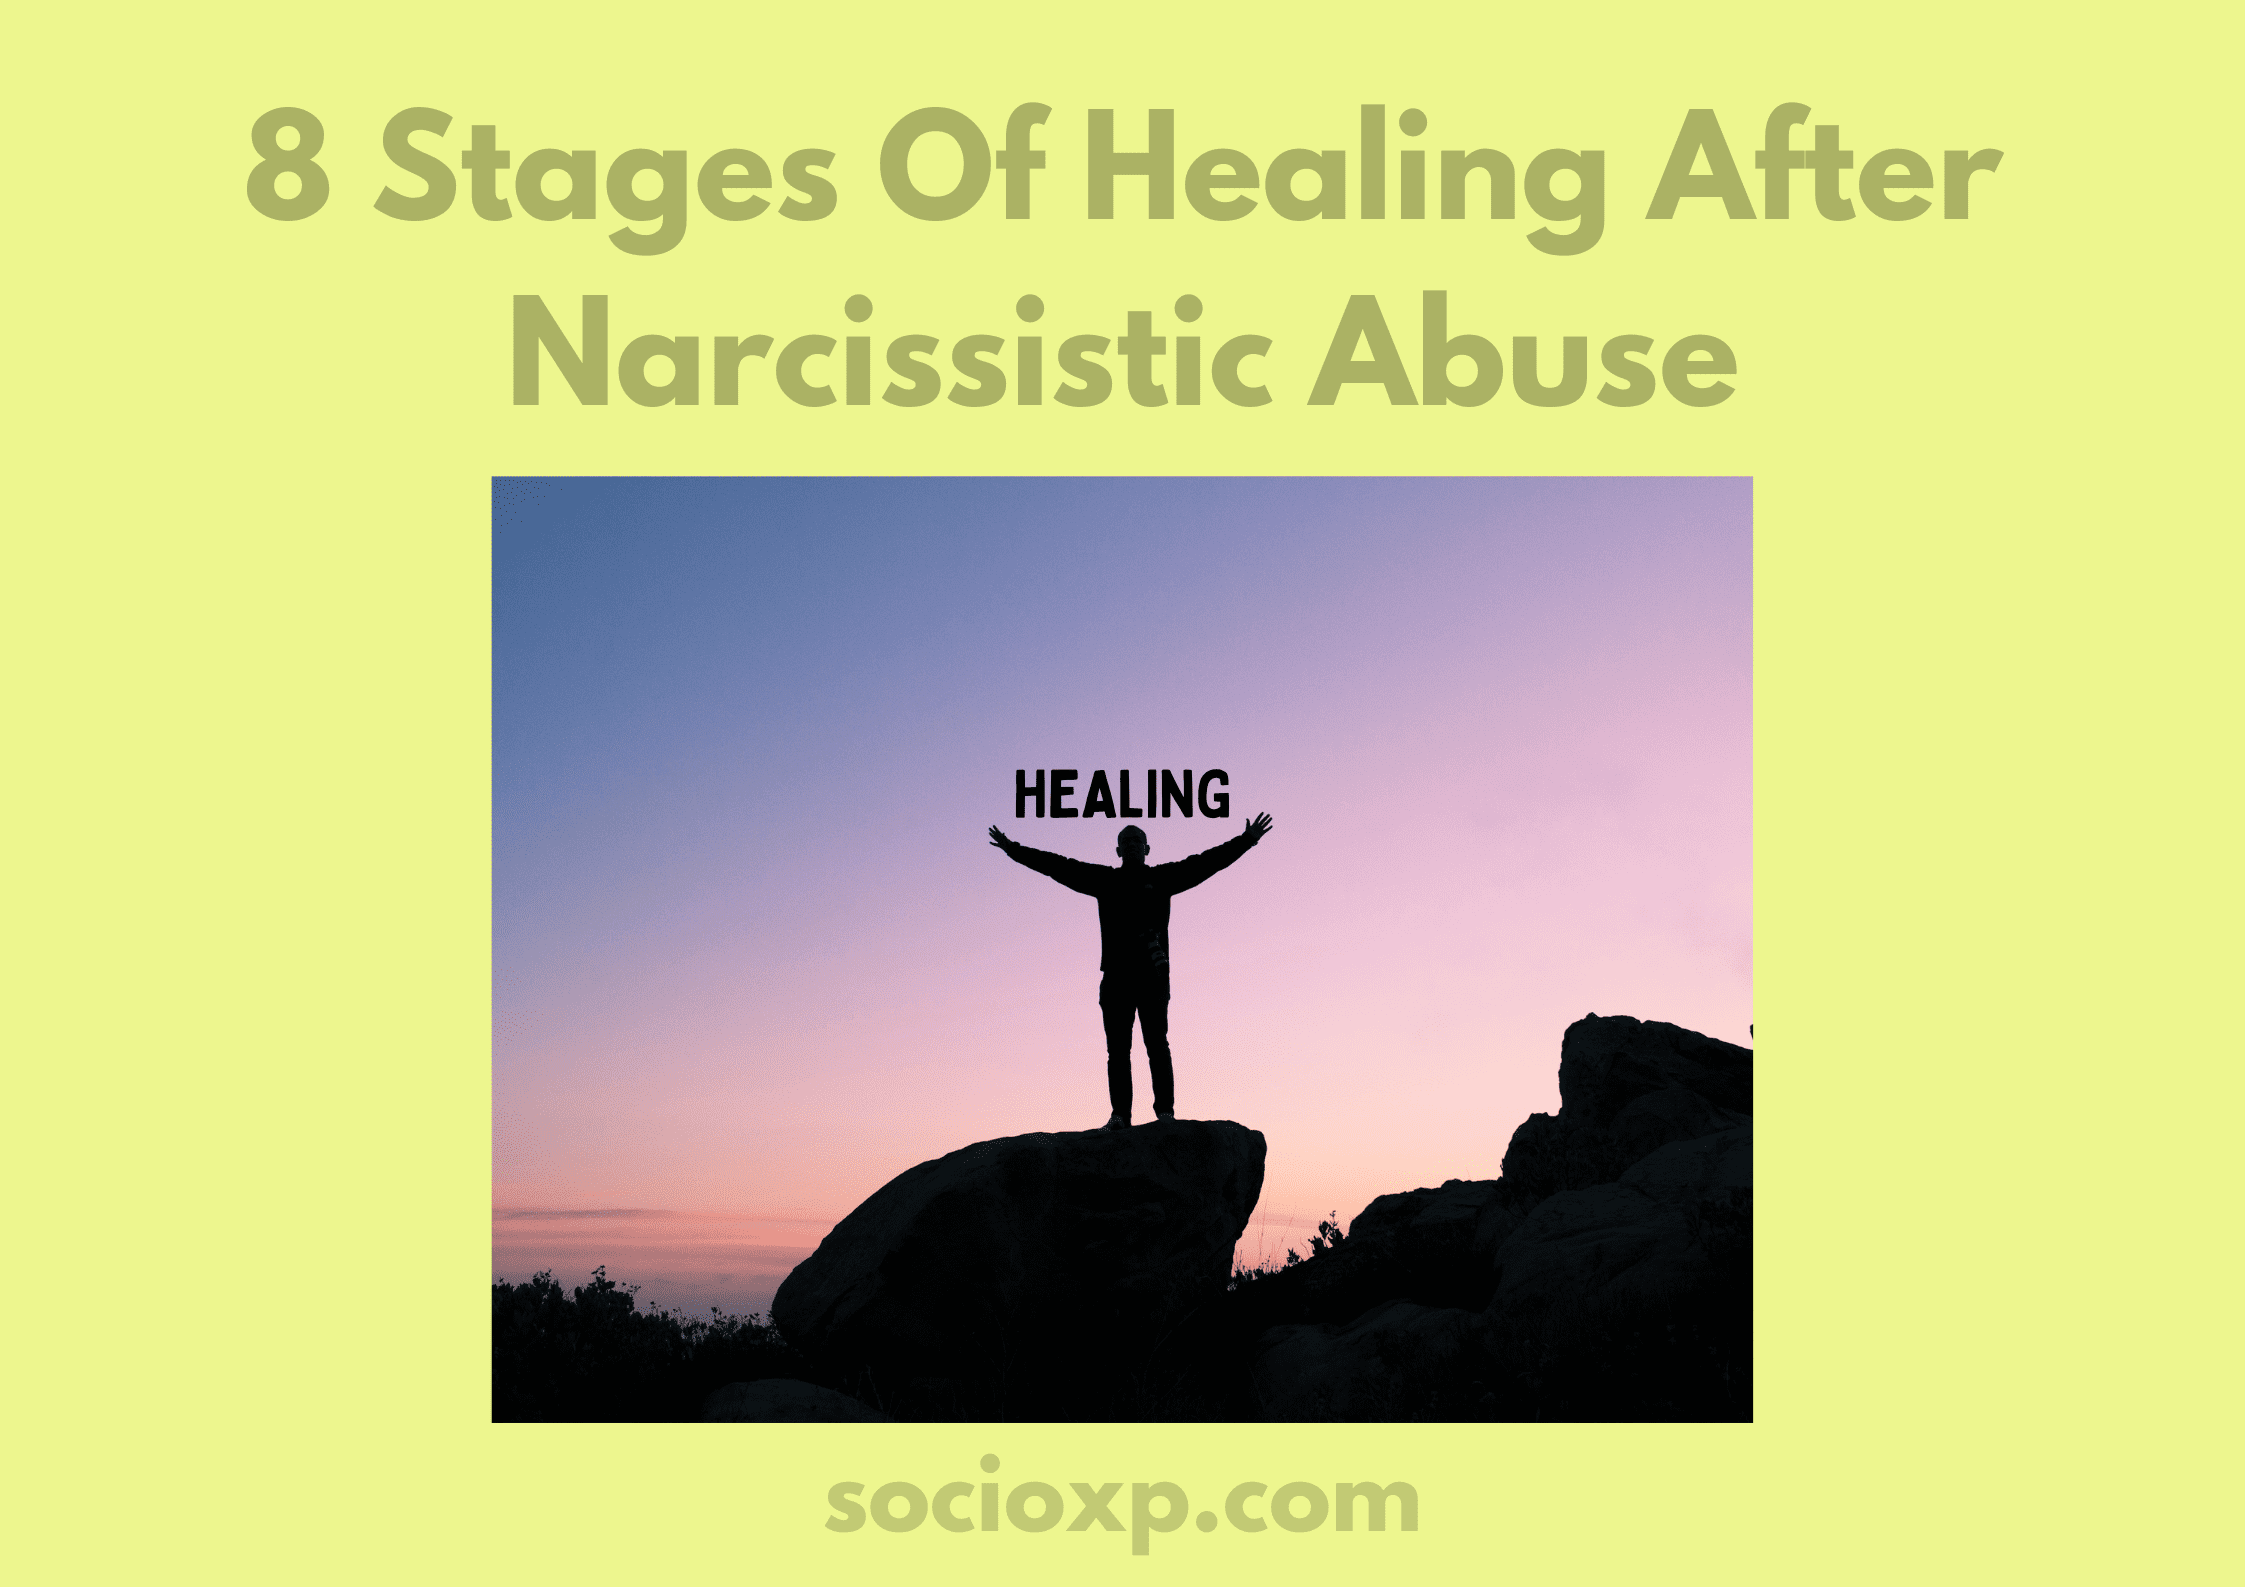 8 Stages Of Healing After Narcissistic Abuse